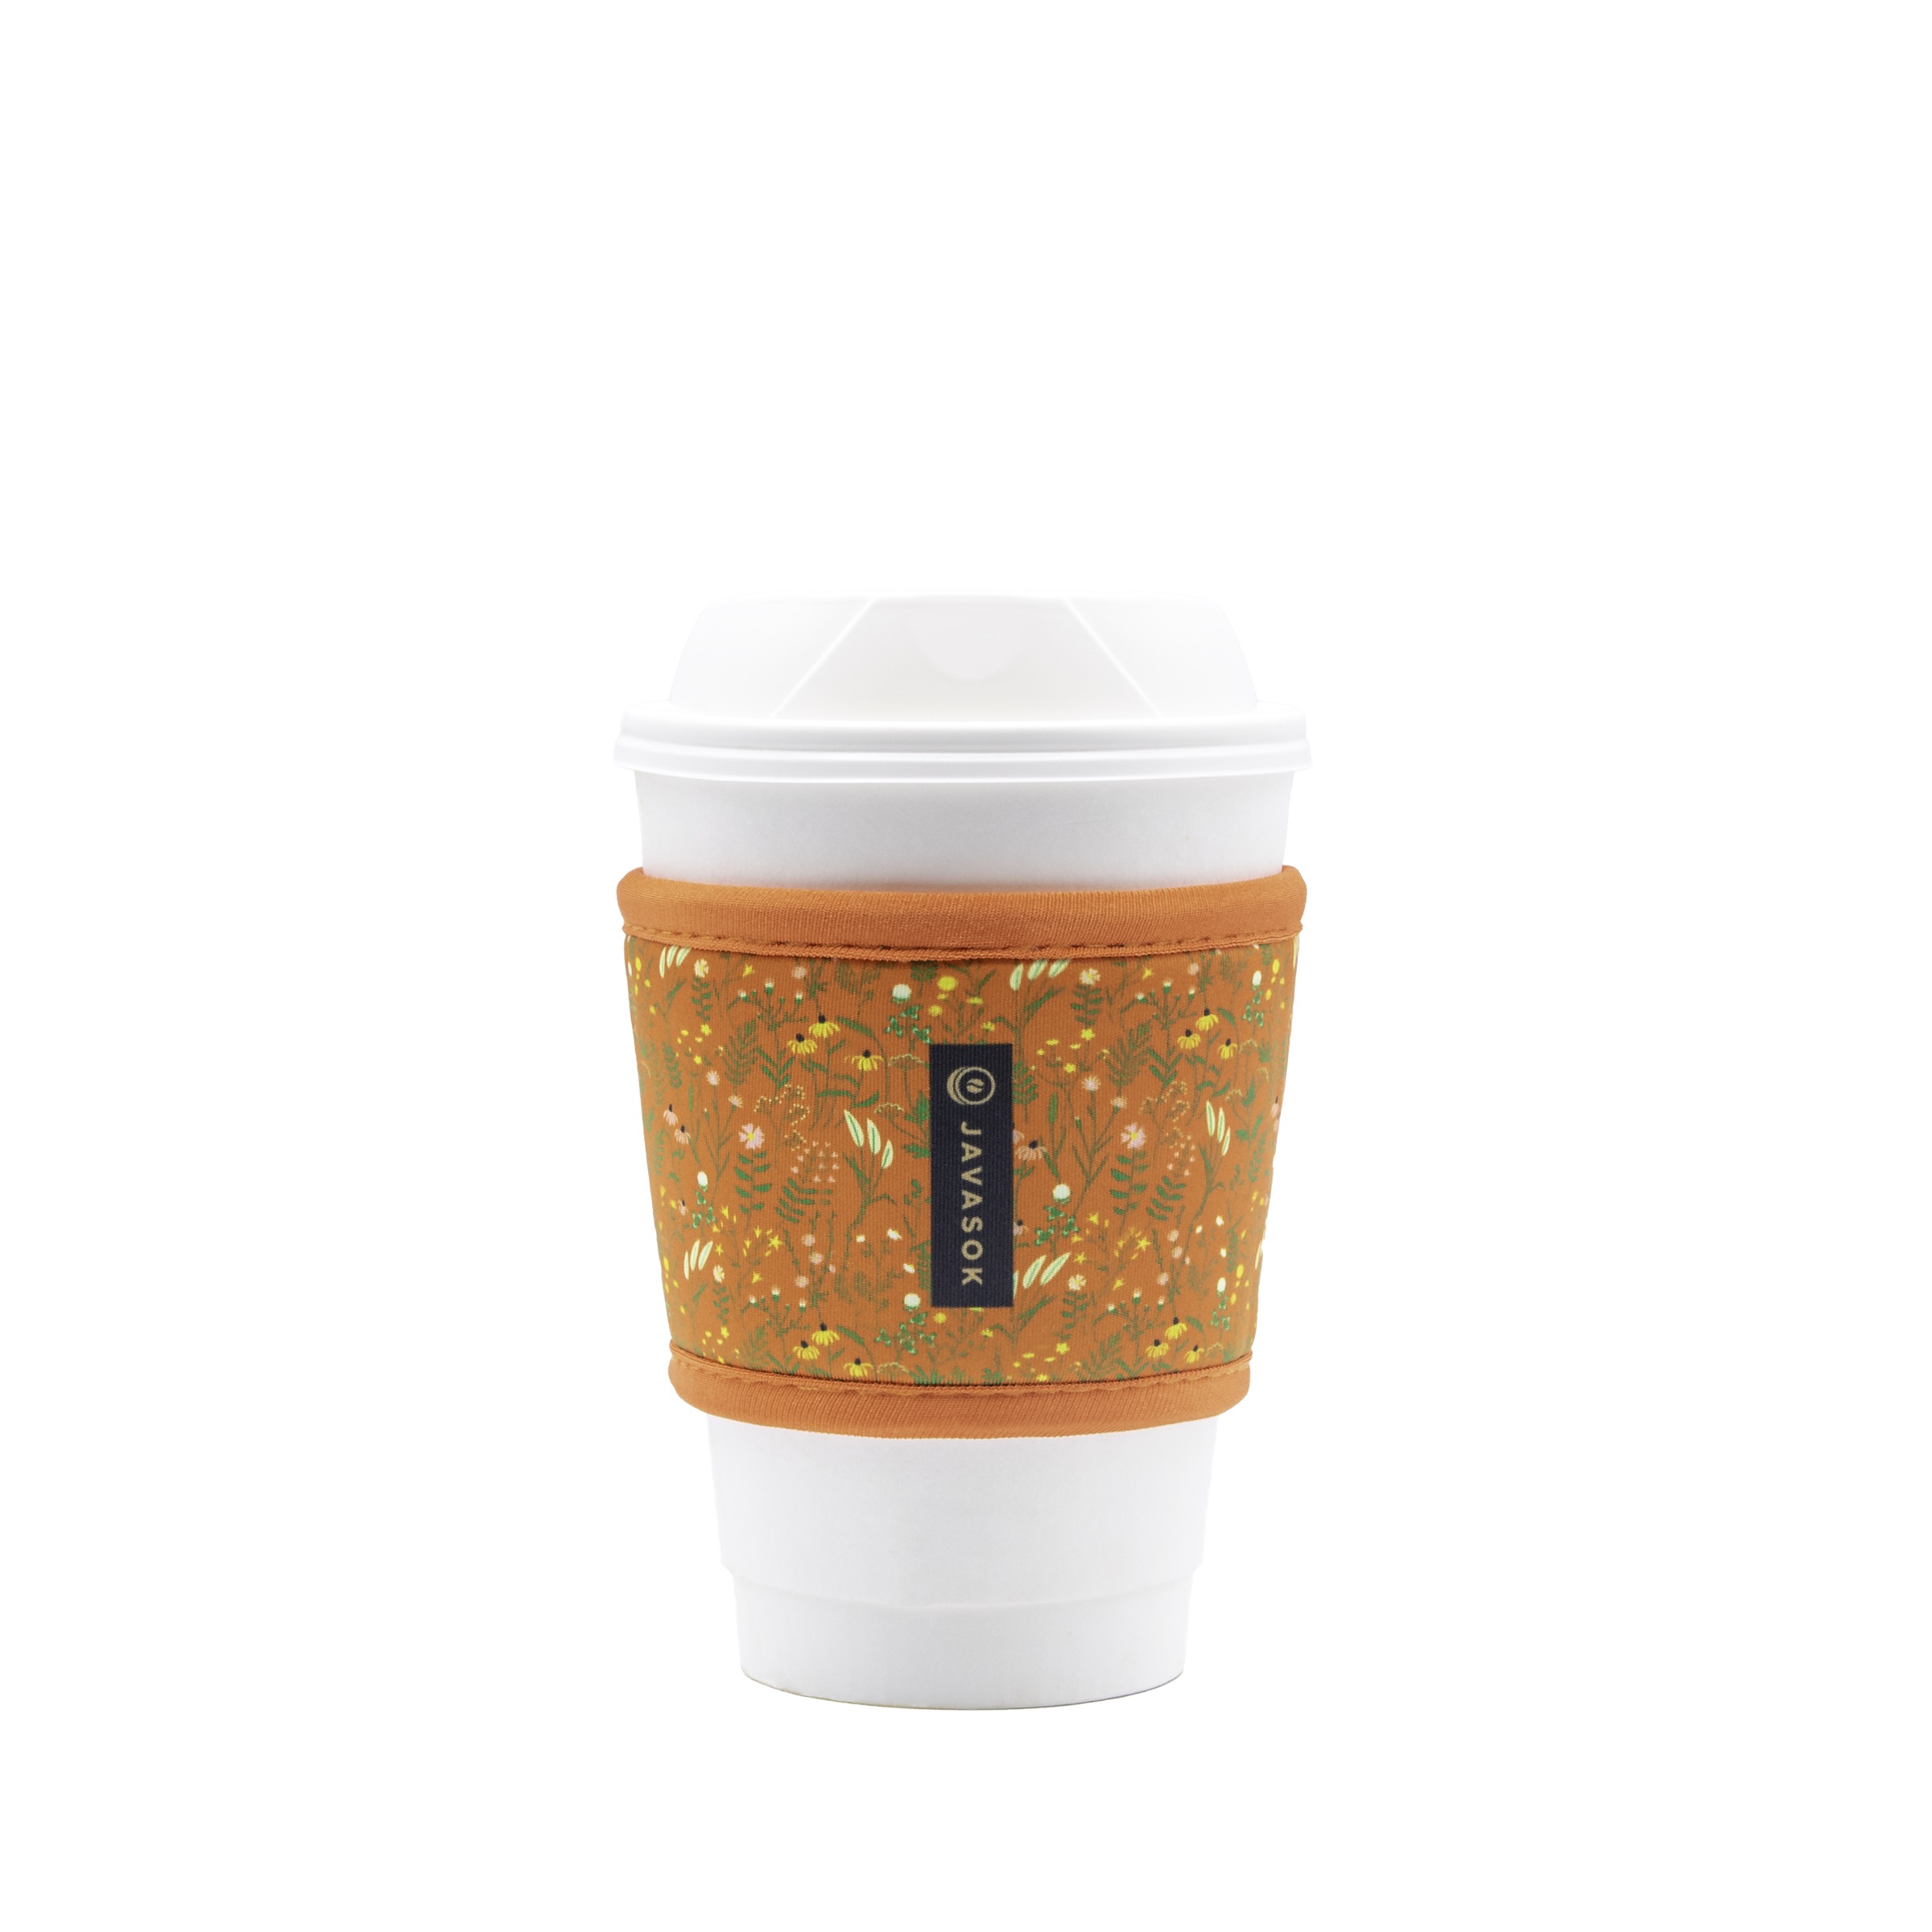 HotSok™ sleeves for hot coffee protect your hands from extreme heat and fit most disposable coffee cups better than single-use cardboard sleeves that tend to slide off easily.

Pictured: HotSok™ Coral Floral.